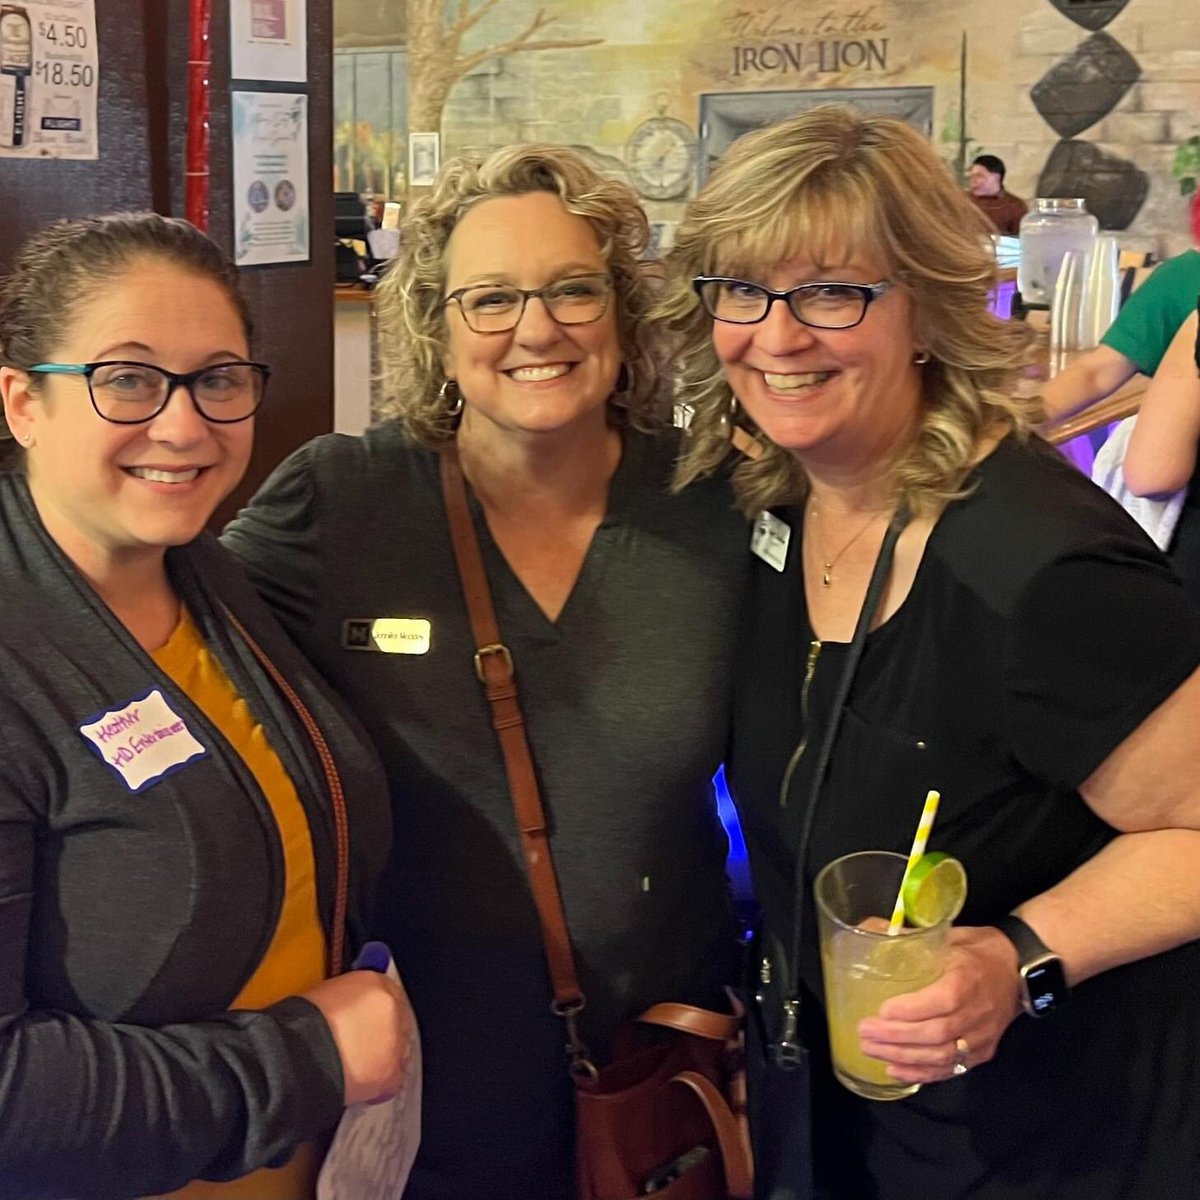 Absolutely!

---

A huge thank you to the YWCA of Hanover for hosting an incredible women's networking event! It was a fantastic opportunity to connect, learn, and grow with fellow inspiring women in our community. 🌟 #YWCAHanover #WomenEmpowerment #NetworkingEvent